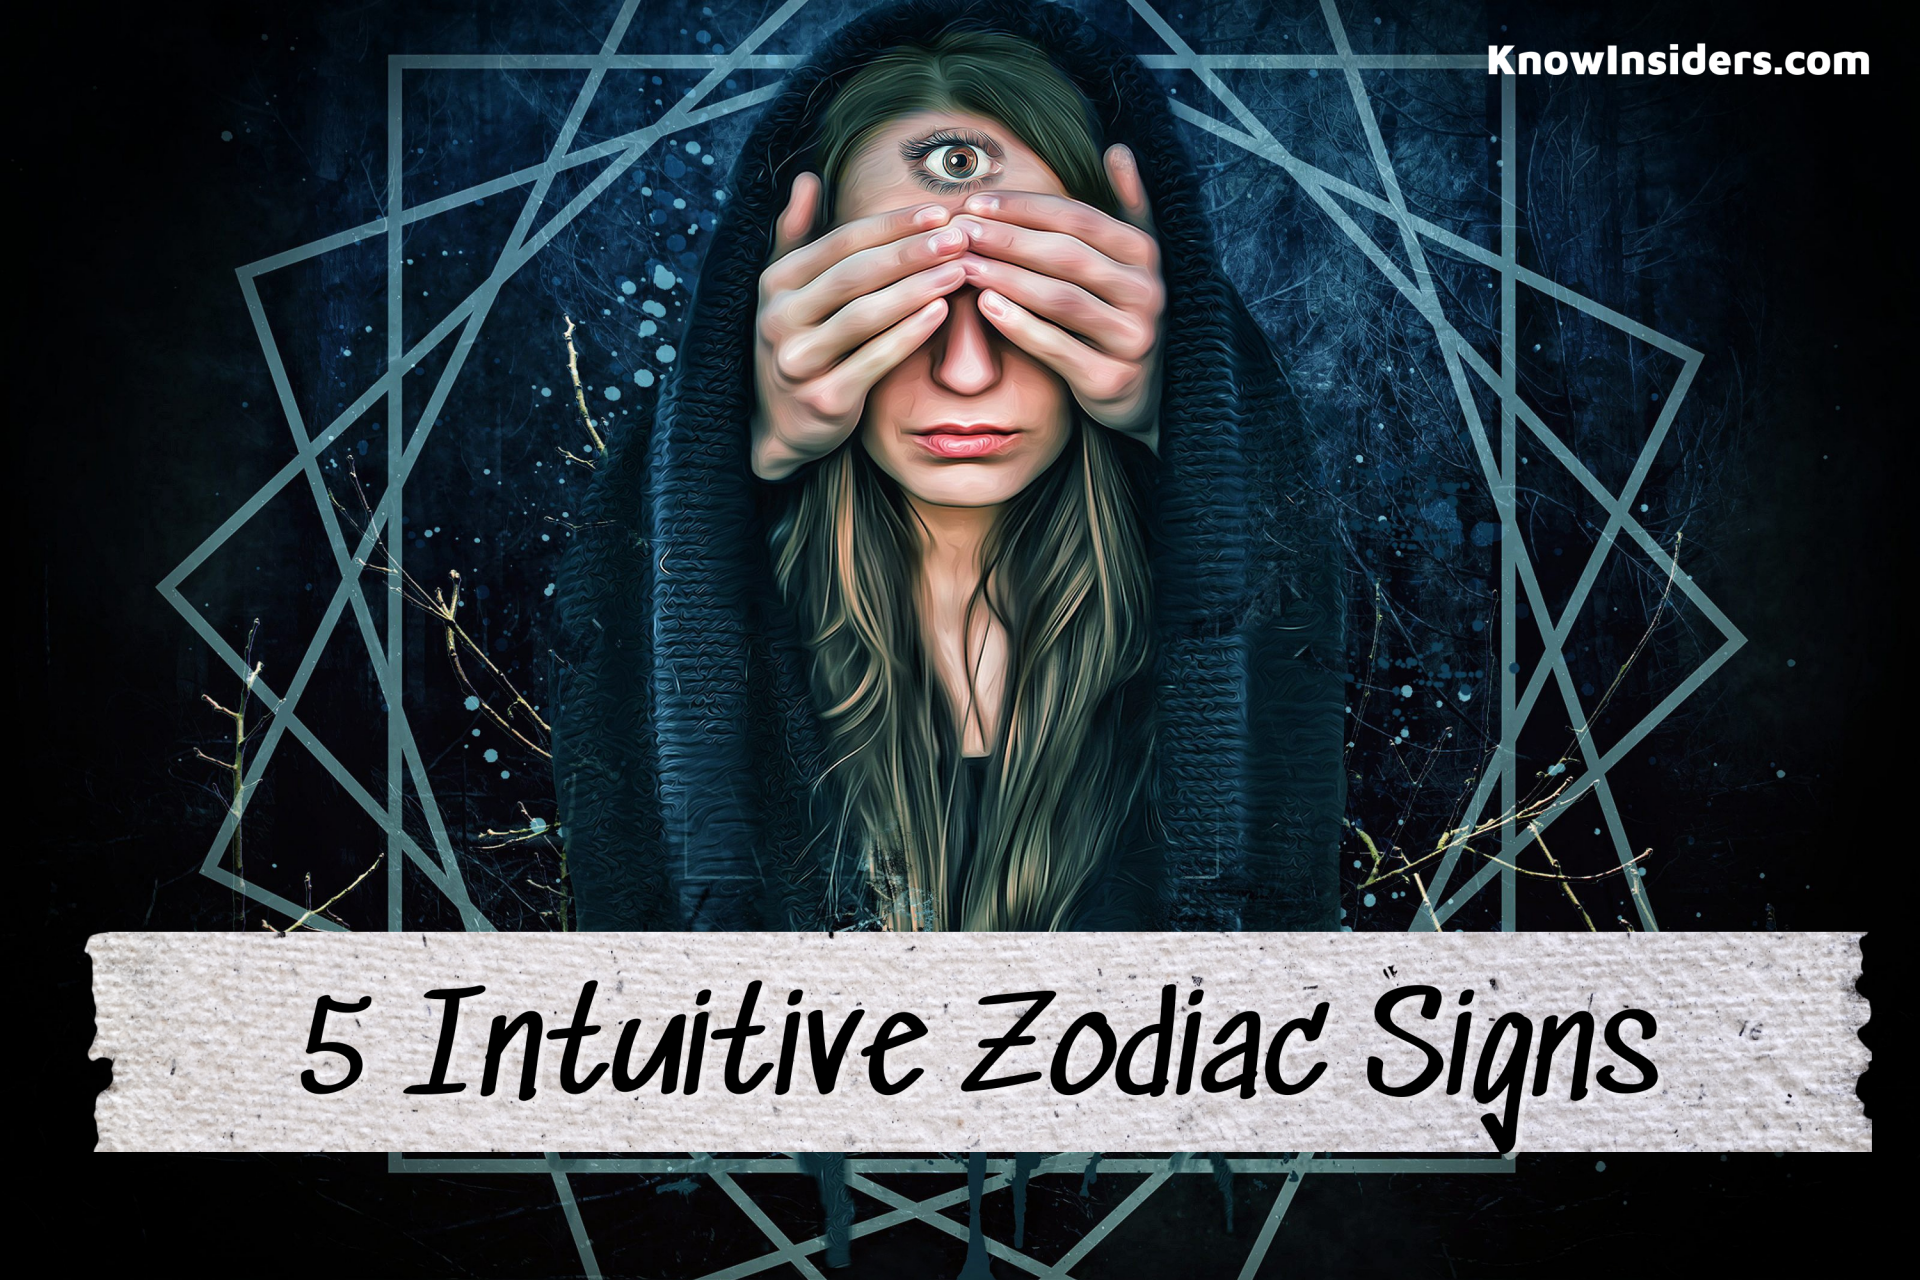 Top 5 Intuitive Zodiac Signs - According to Astrology